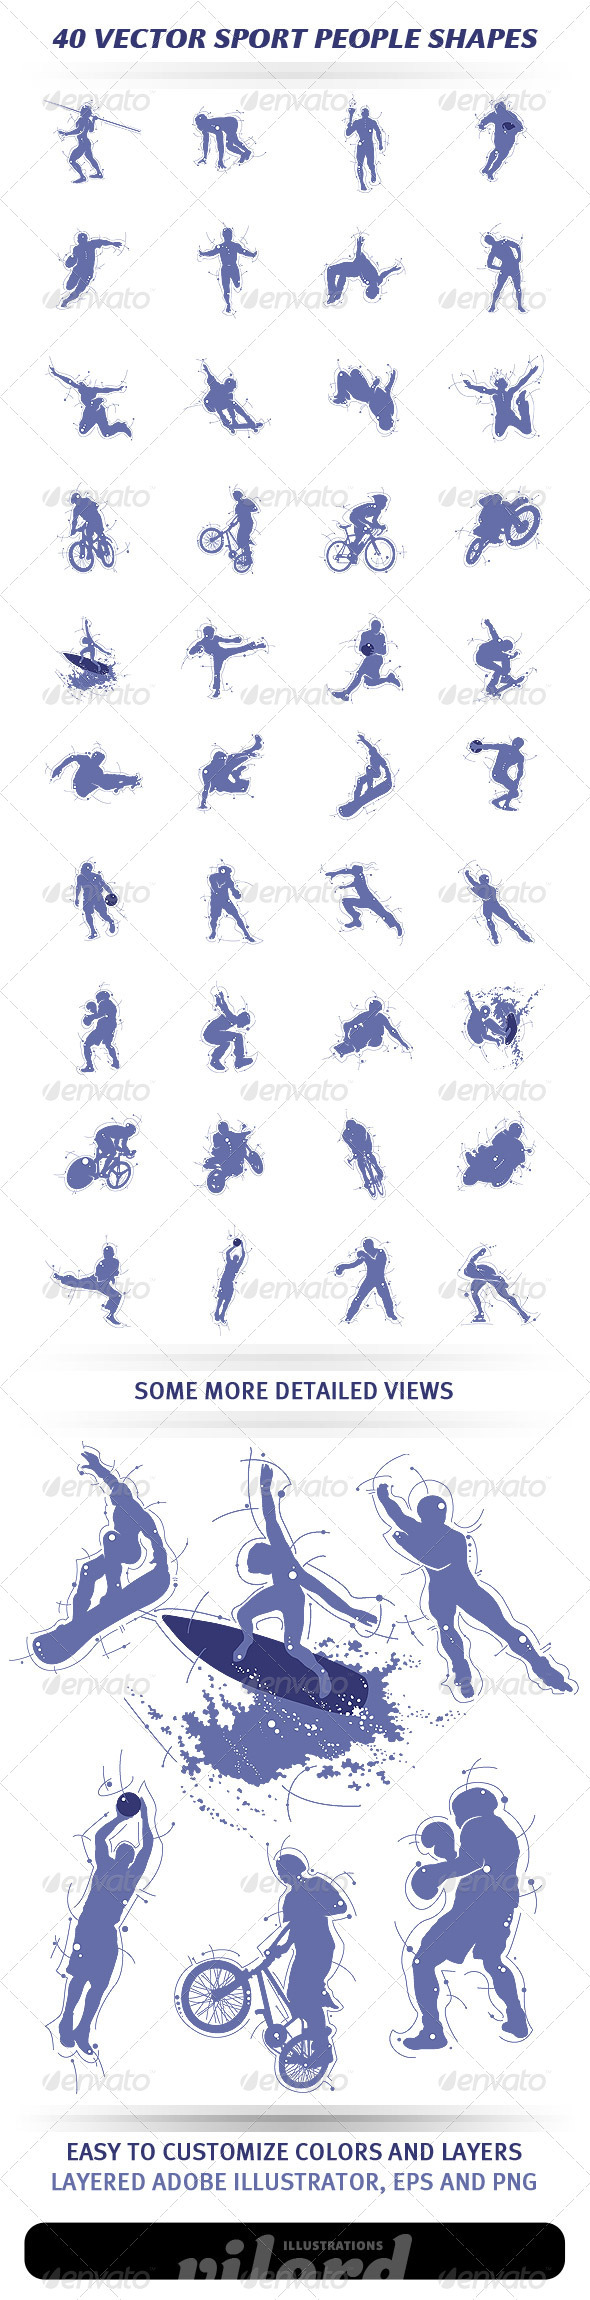 40 Vector Sport People Shapes